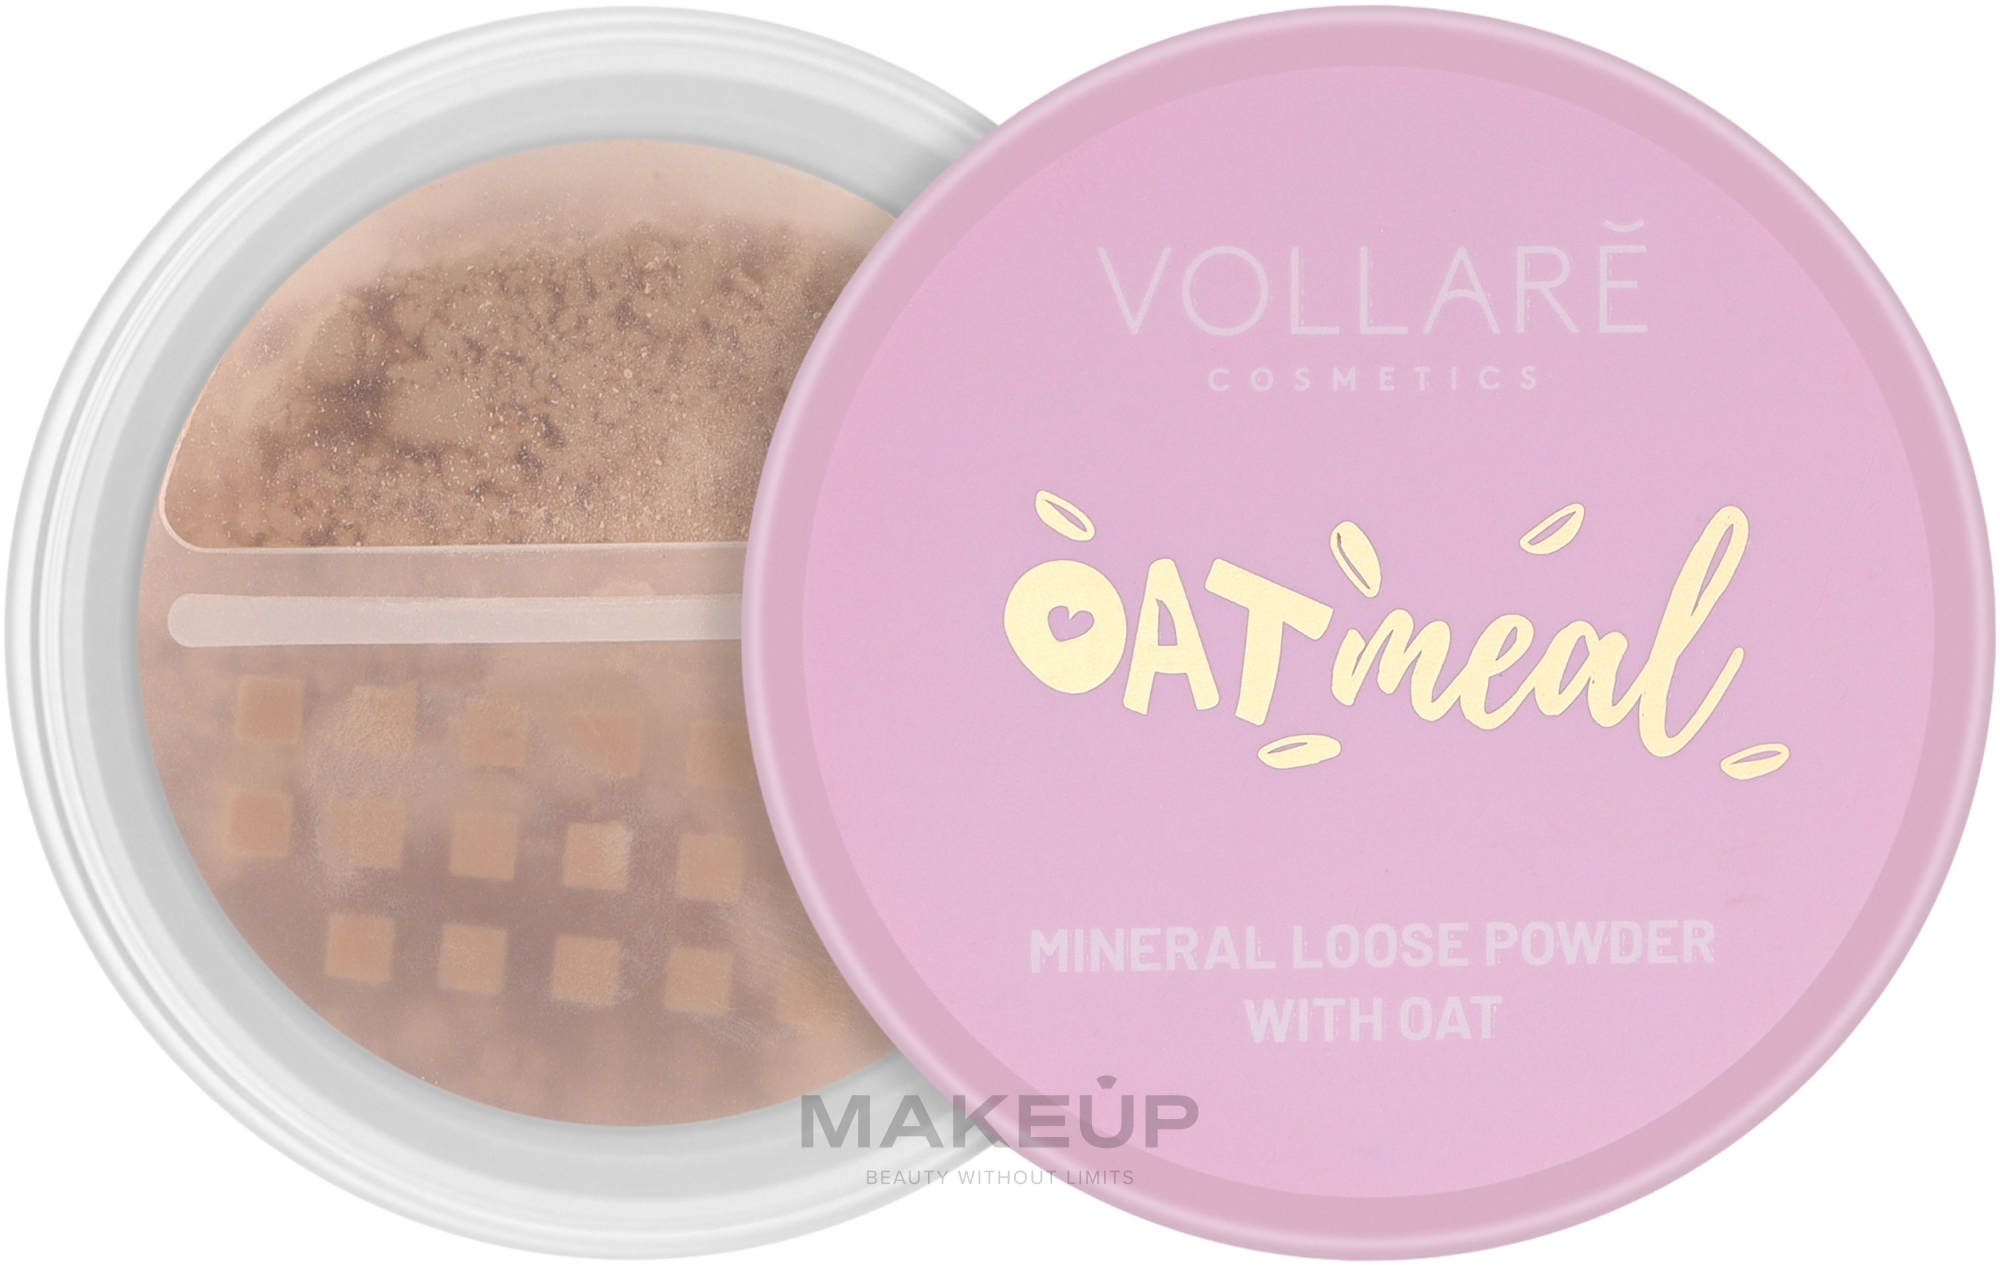 Oat Loose Powder - Vollare Oat Meal Mineral Loose Powder With Oat — photo 00